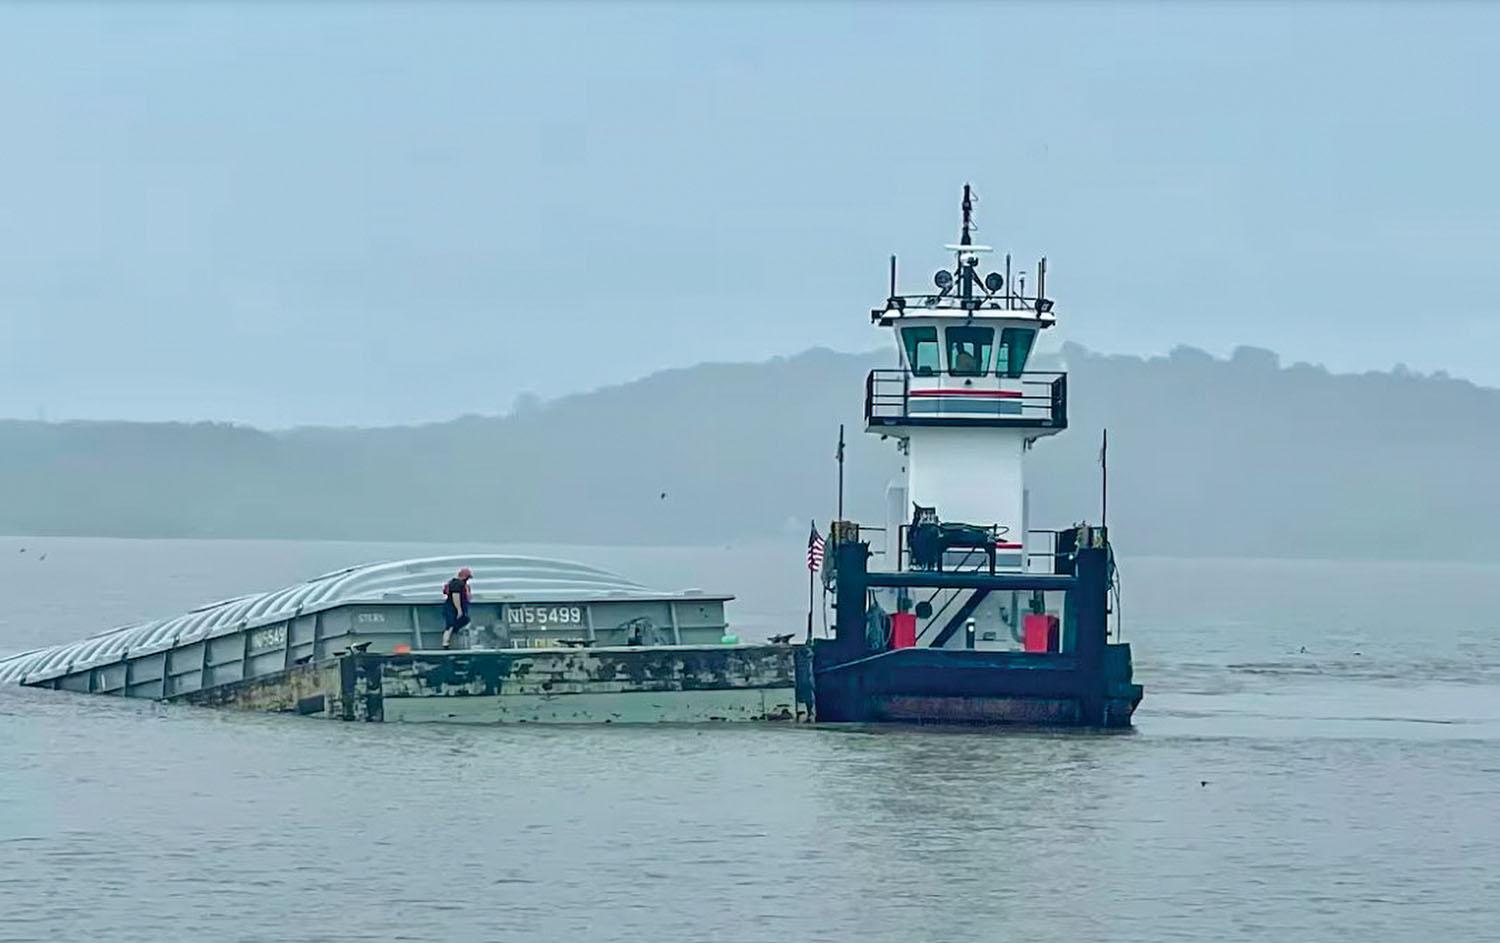 A barge carrying corn sank May 9 following an allision between the tow of the mv. Joe B. Wyatt and the bridge over the Mississippi River between Fort Madison, Iowa, and Niota, Ill. (Photo courtesy of WGEM, Quincy, Ill.)